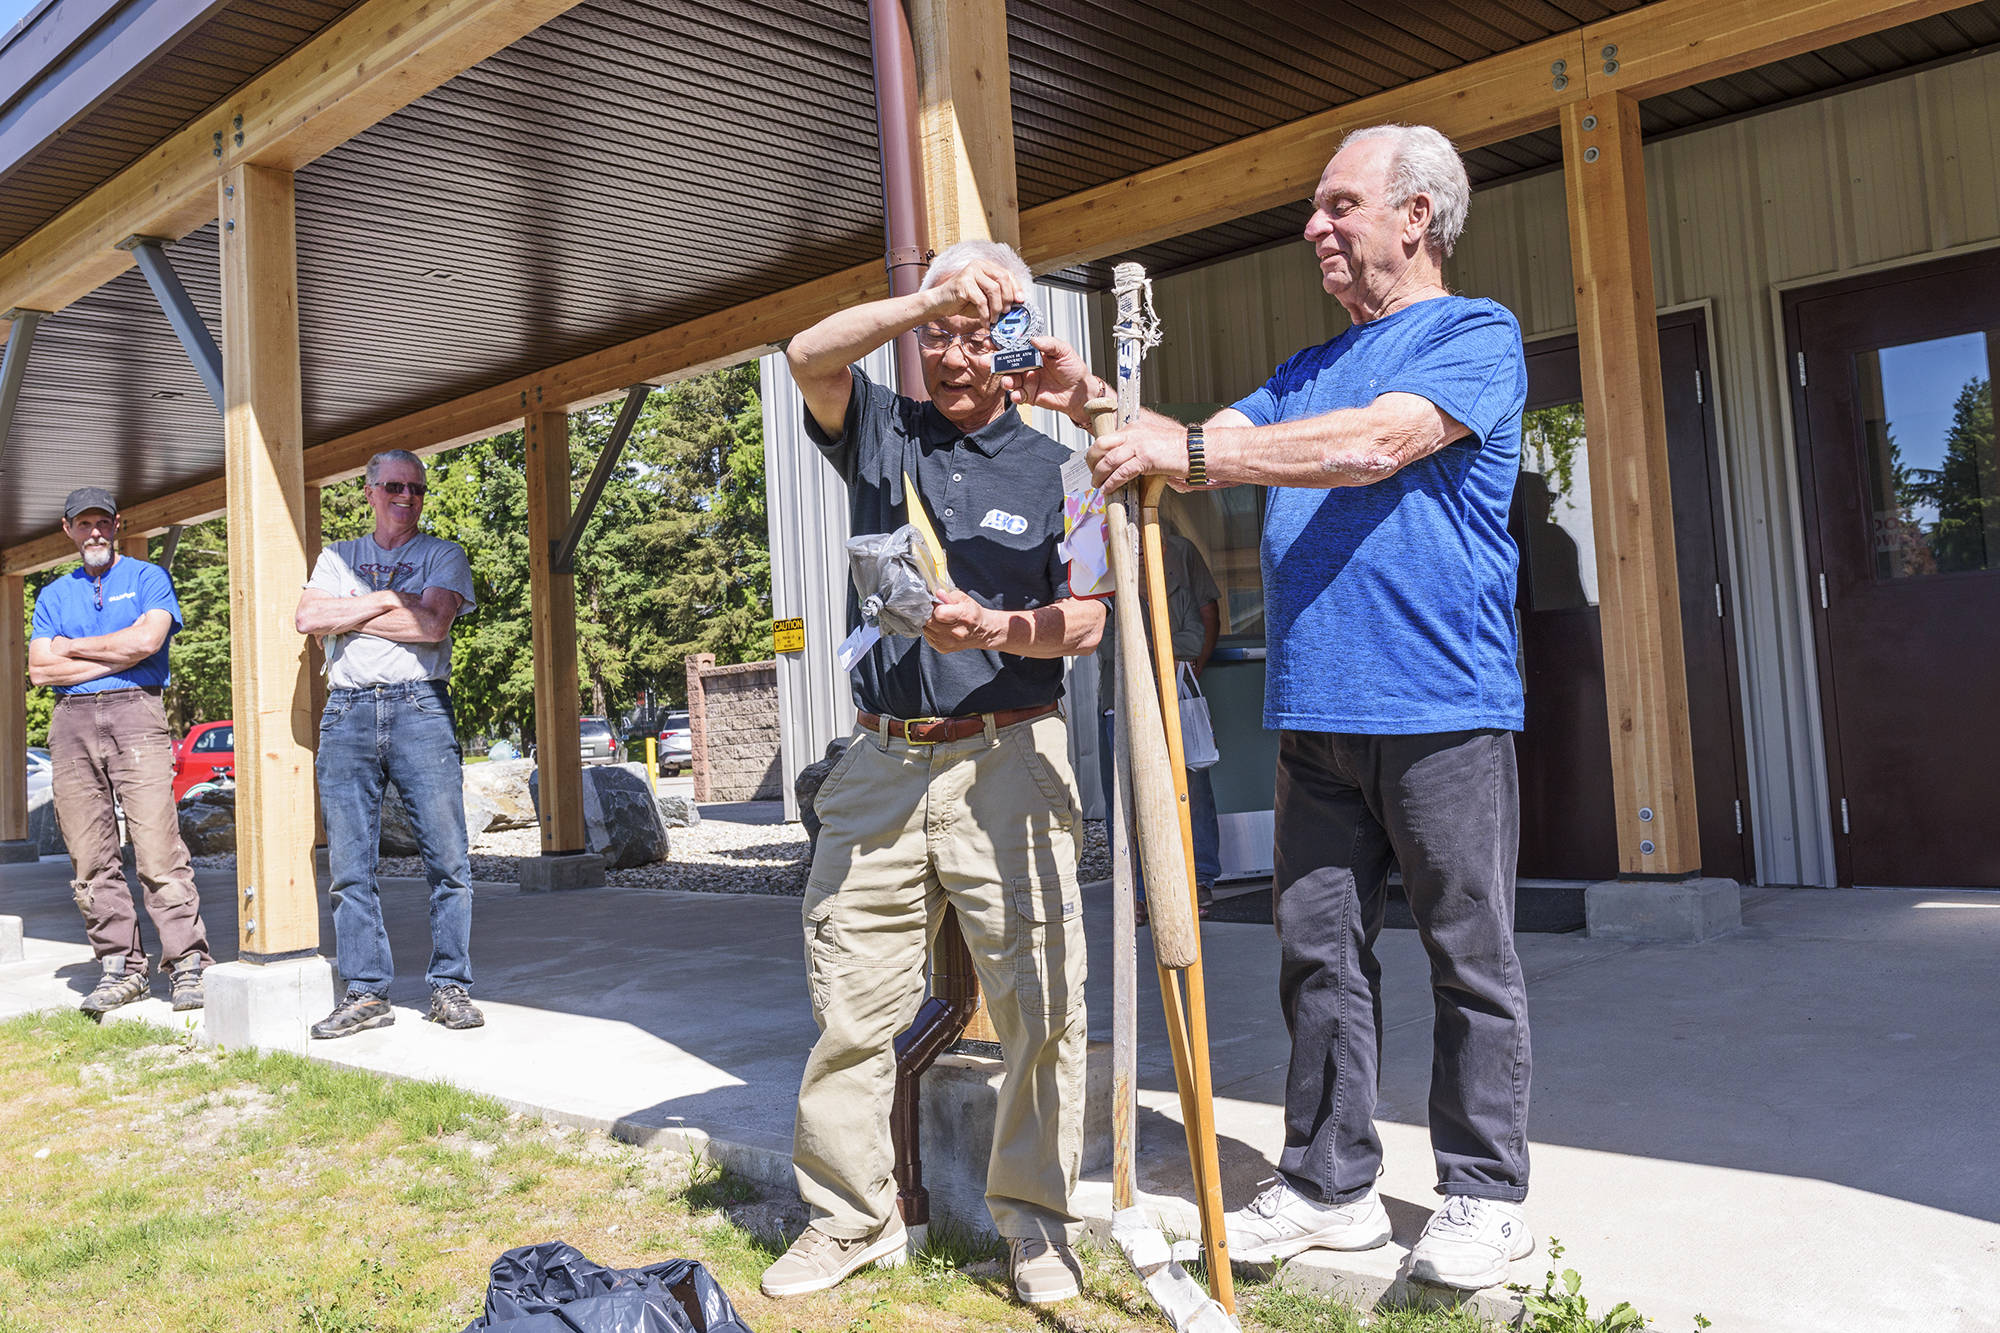 Salmon Arm Minor Hockey’s Roy Sakaki presents Wayne March with some gifts for his retirement, including a crutch and an old hockey stick, during a surprise presentation outside the Sicamous and District Recreation Centre on Thursday, June 10, 2021. (Lachlan Labere-Salmon Arm Observer)